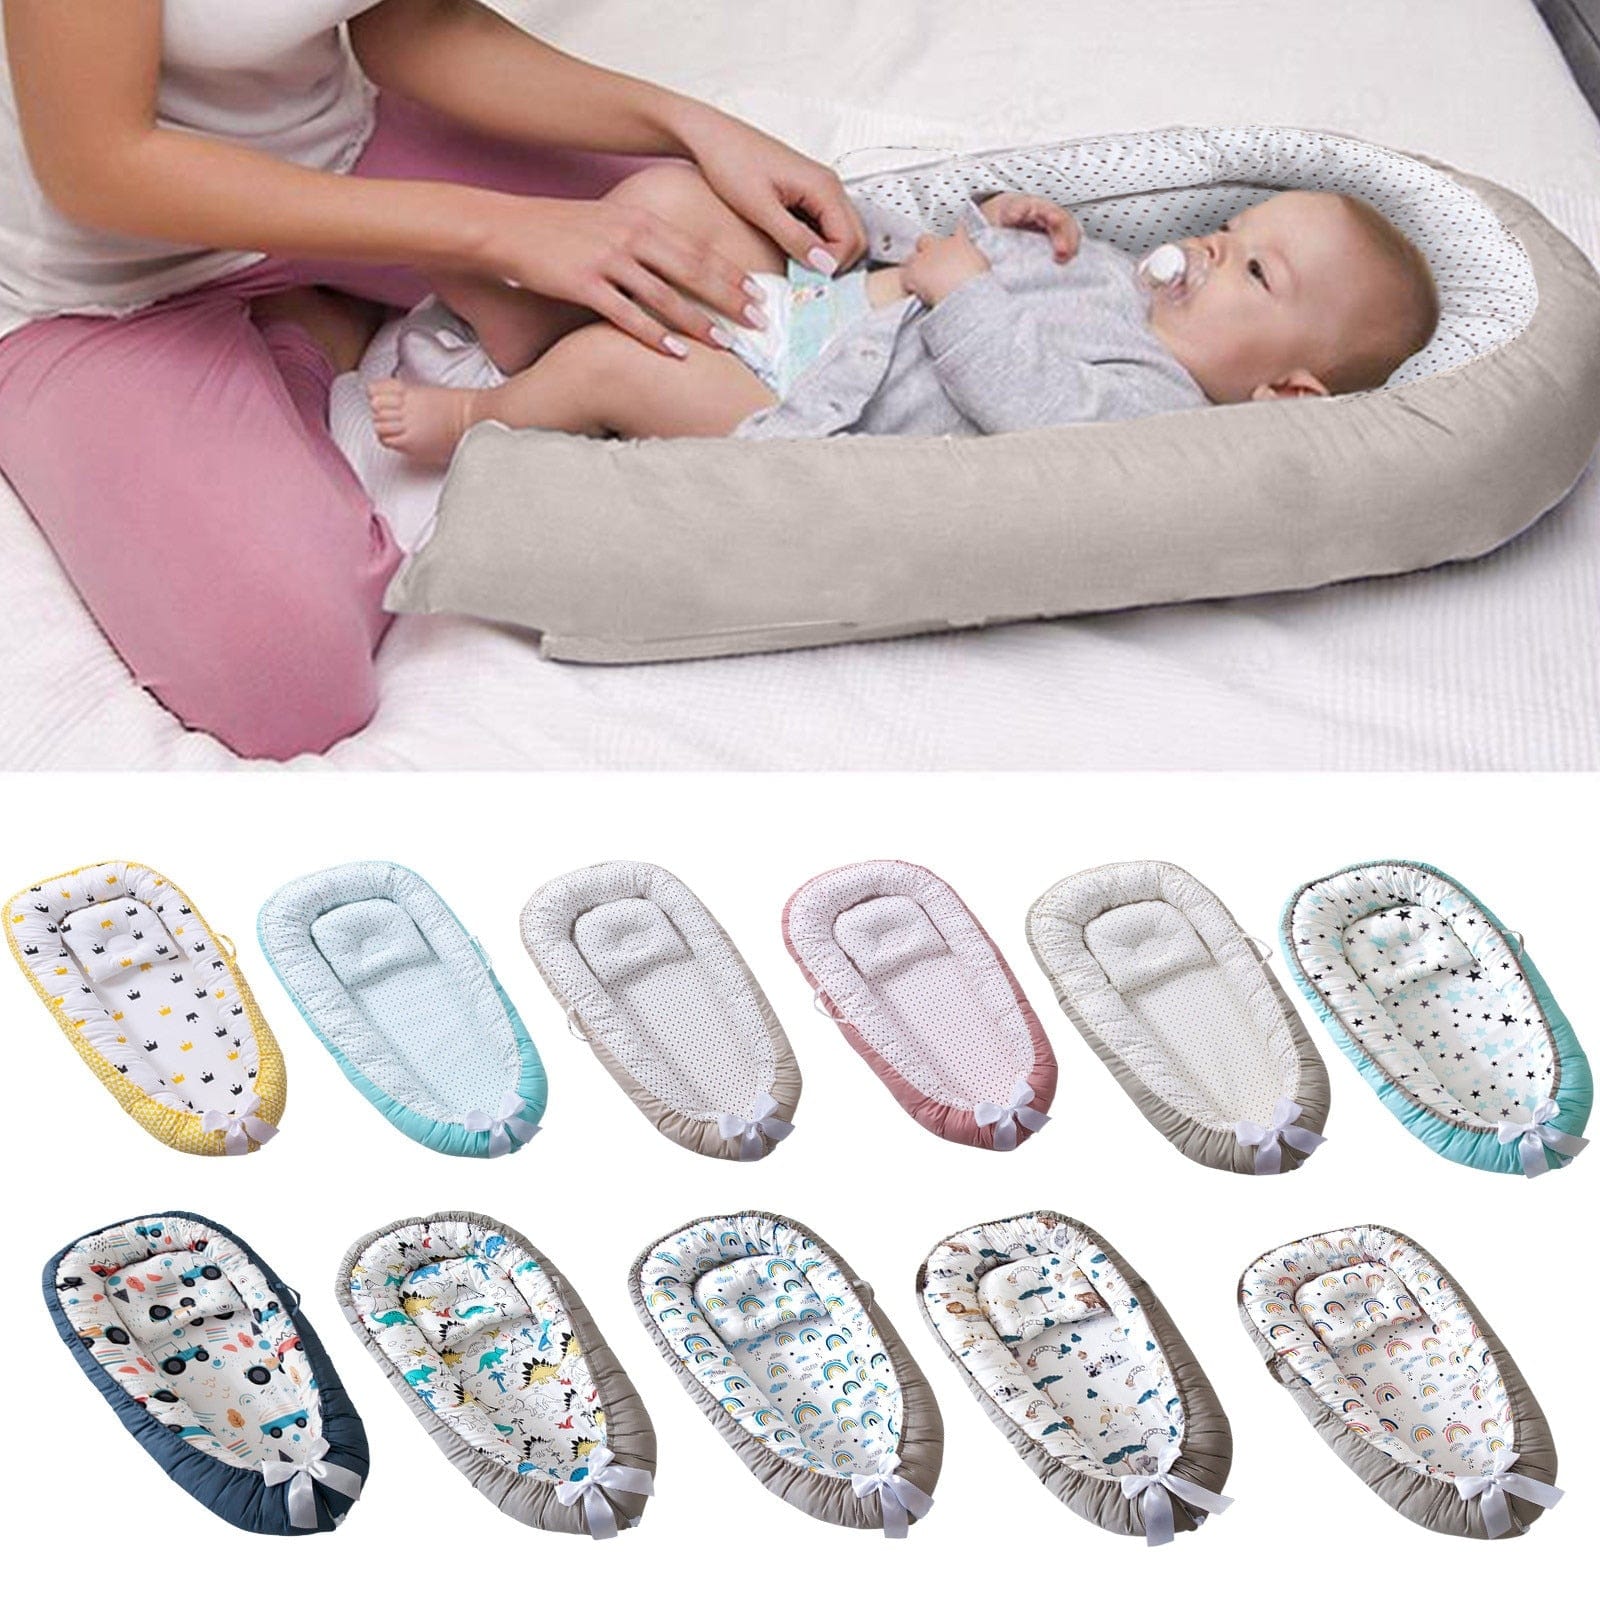 Padded baby nest  Sure Deals Baby World - Baby products and